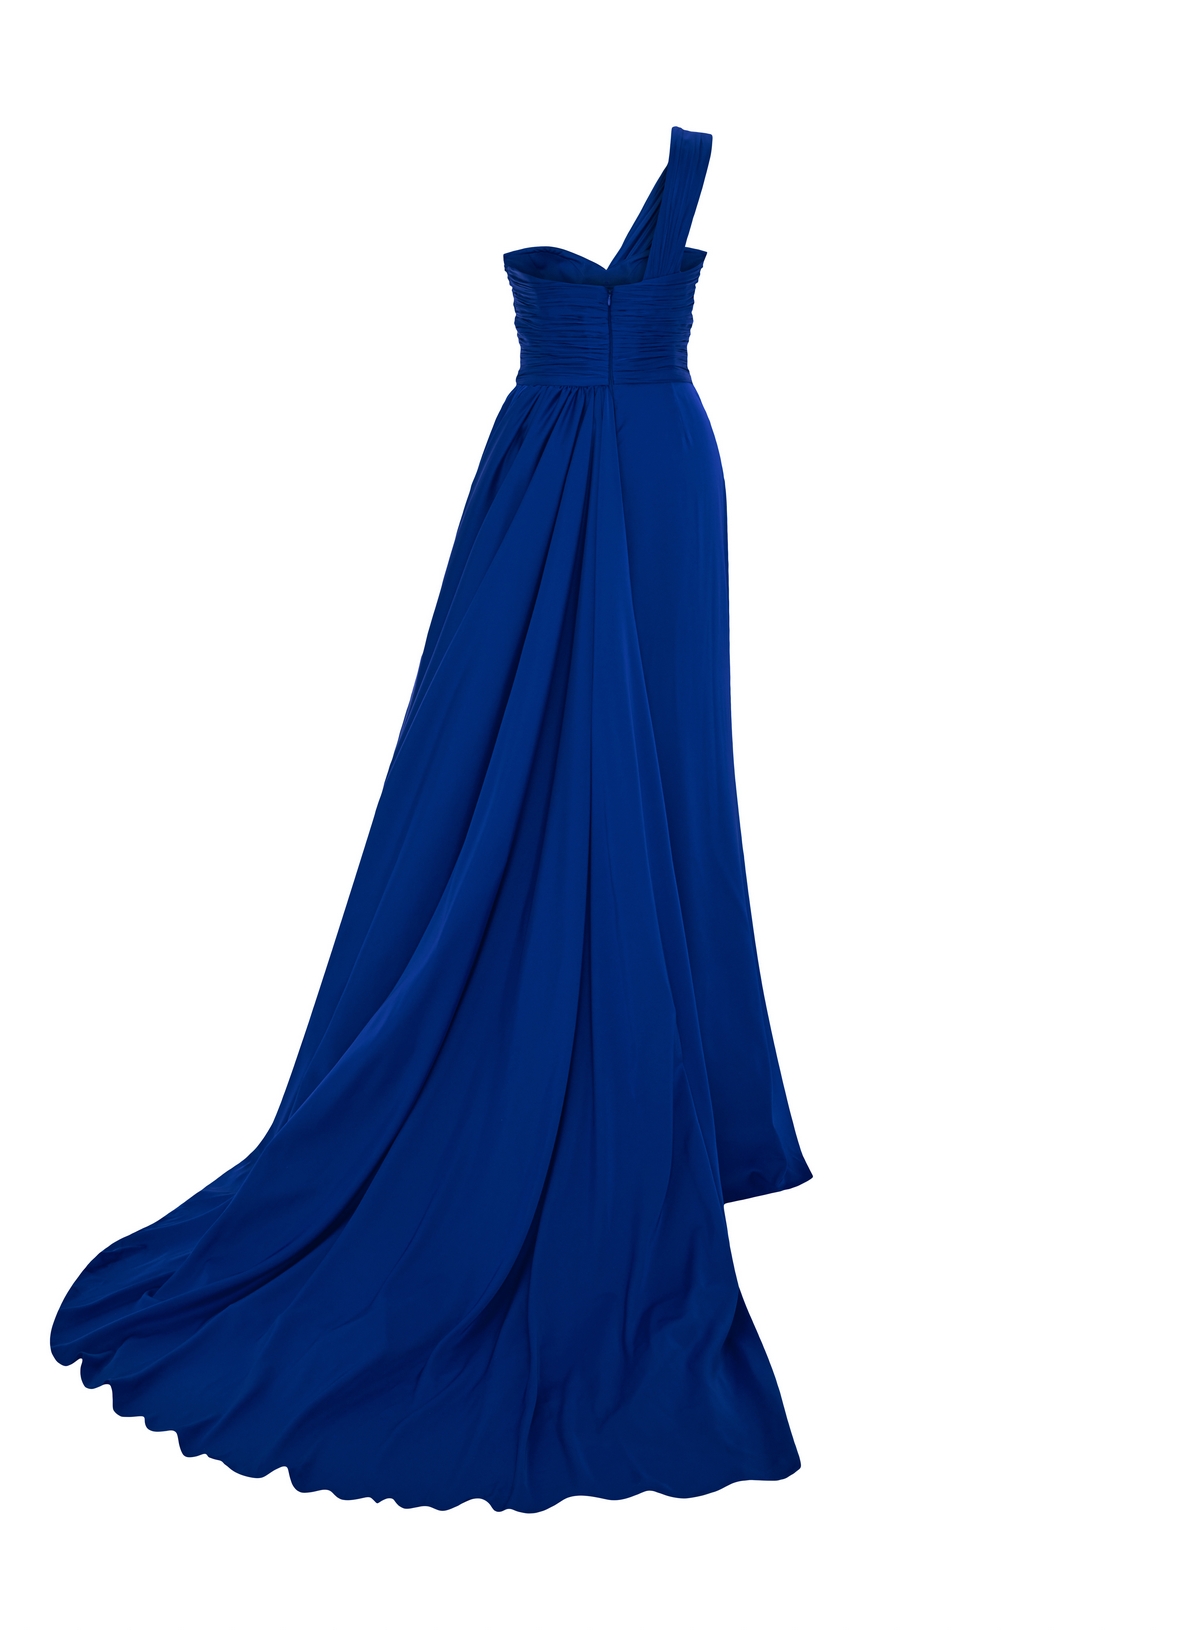 Picture of Blue Miss Dress